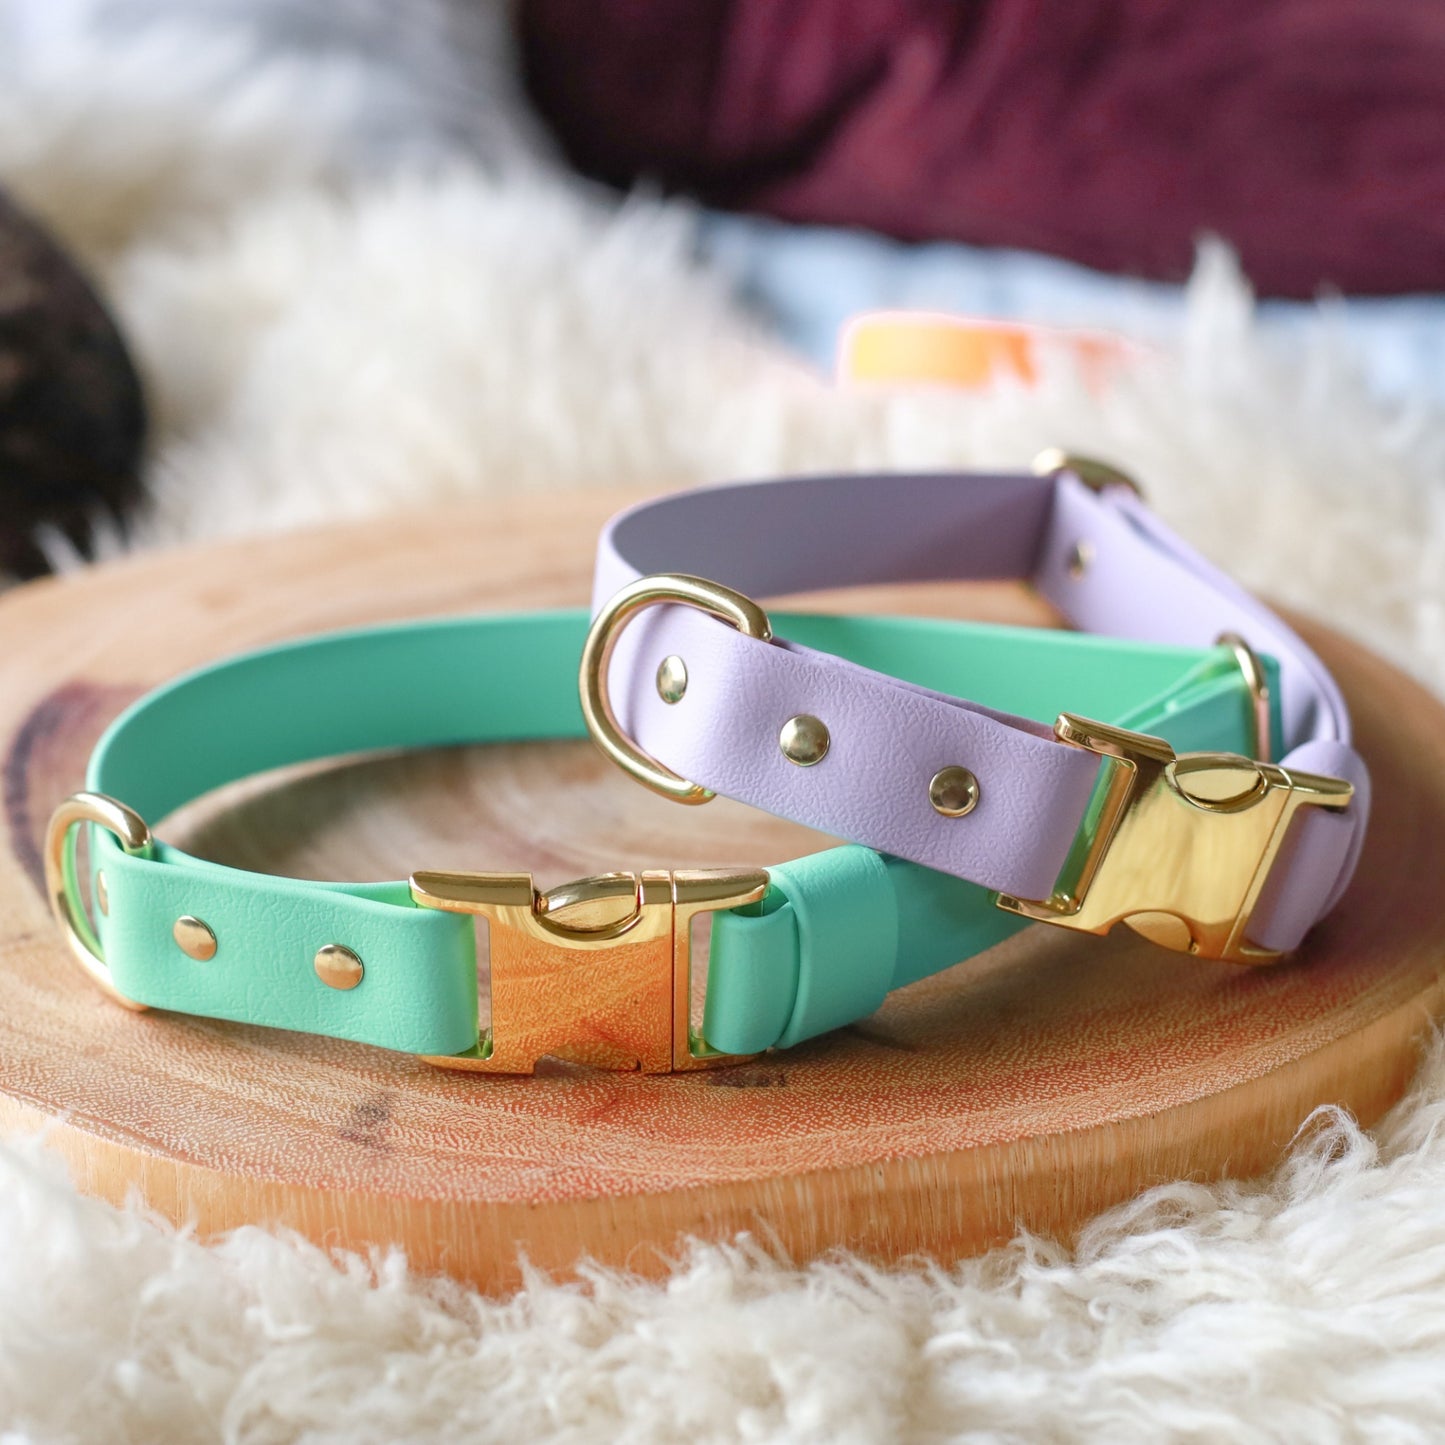 Adjustable collar with brass buckle